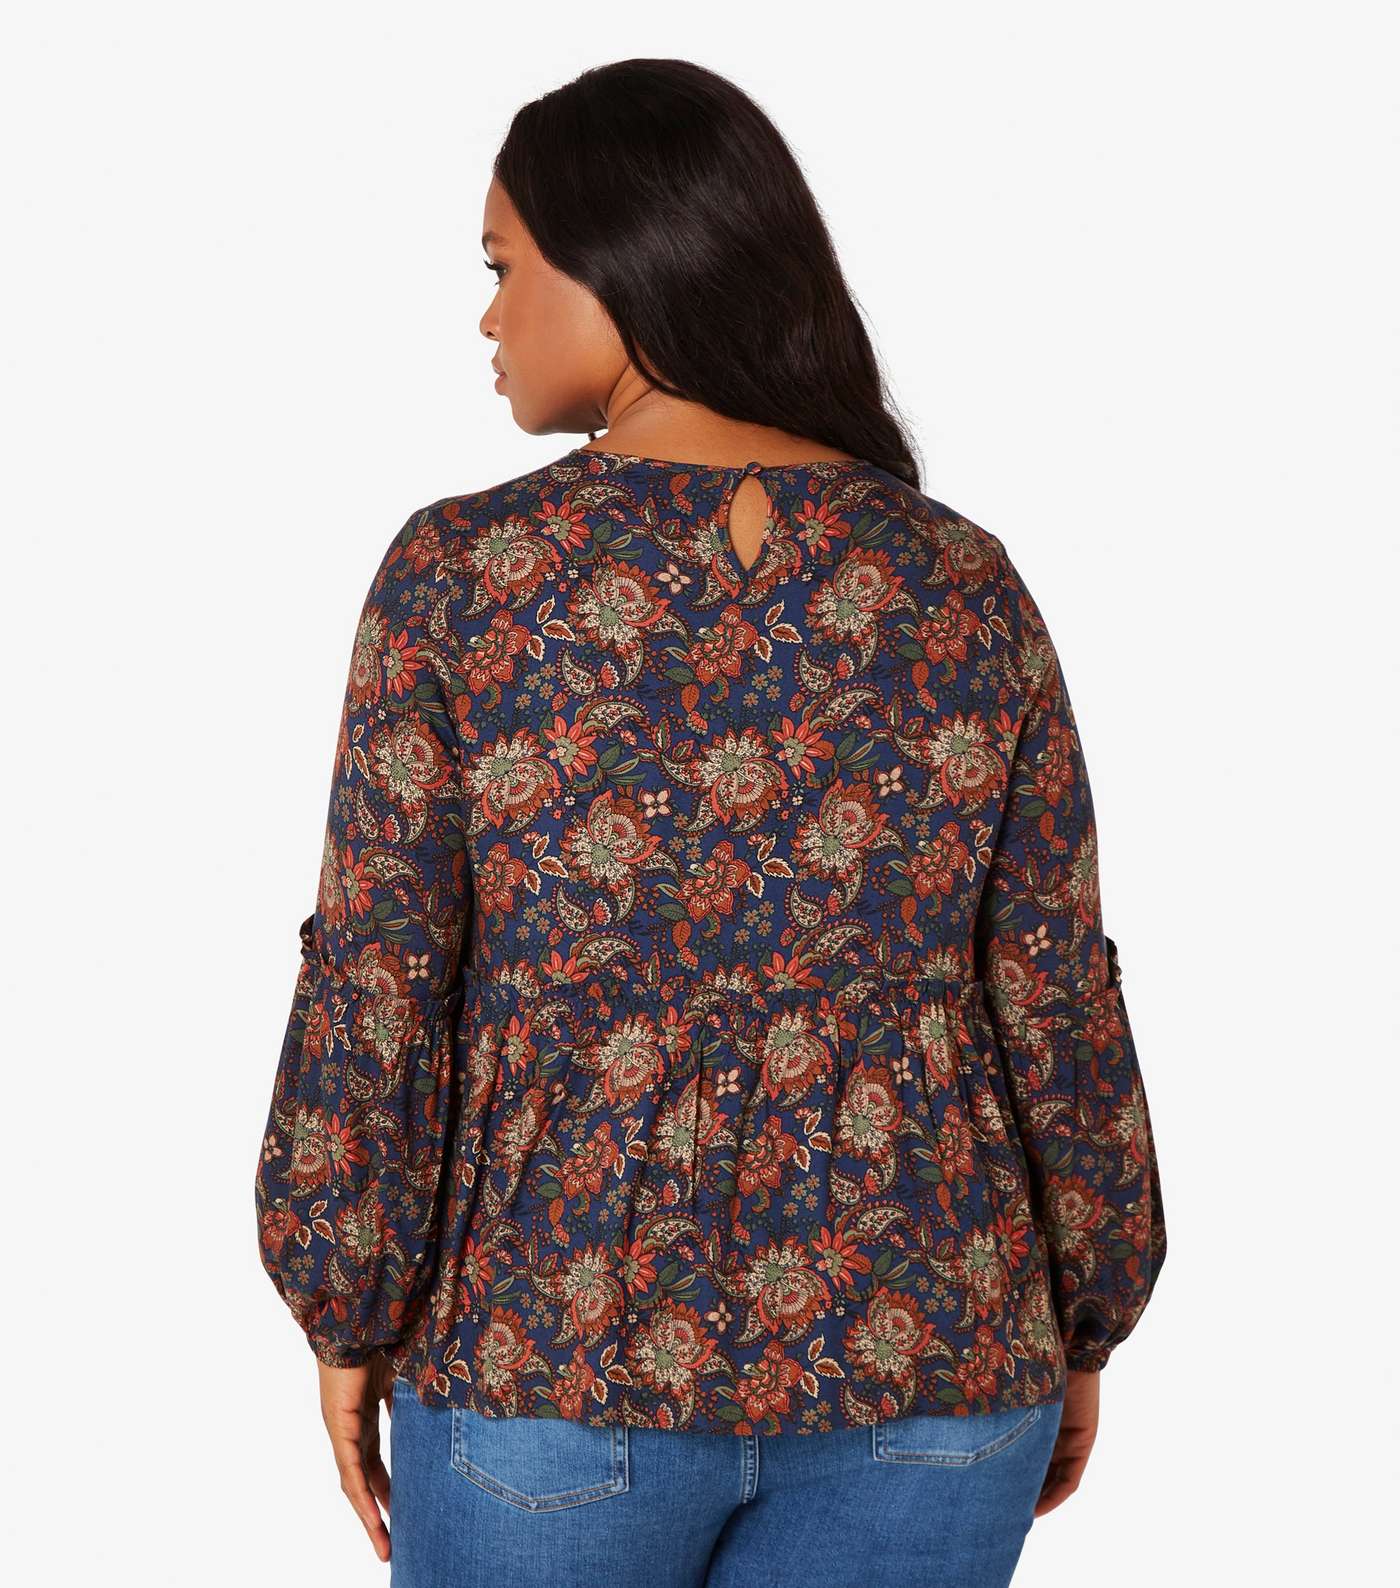 Apricot Curves Navy Floral Ruffle Hem Top Image 3